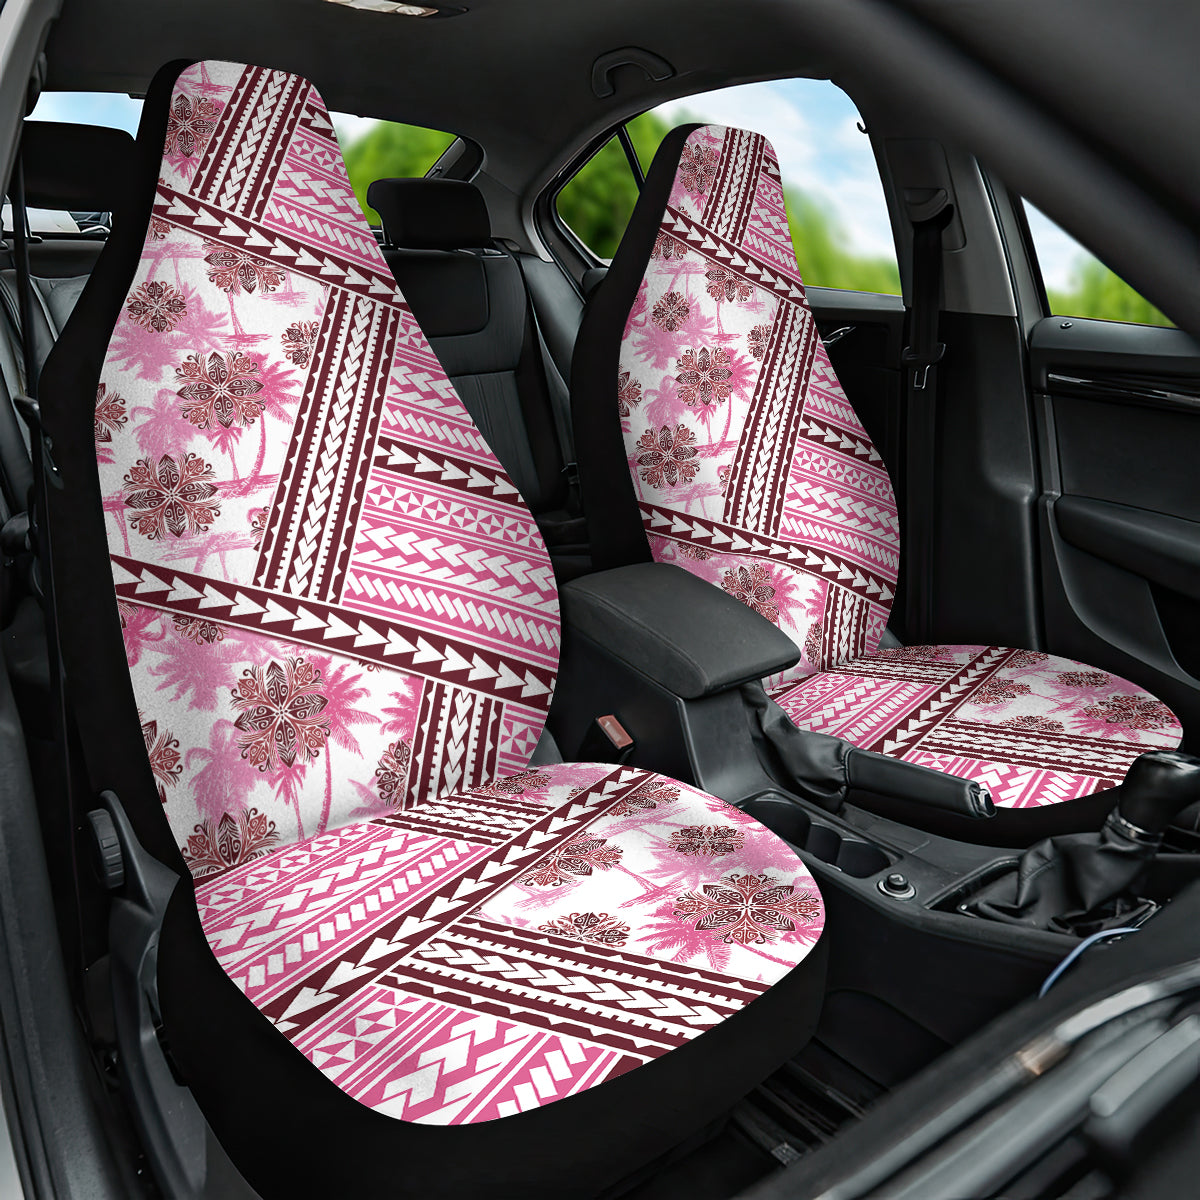 Hawaii Quilt Car Seat Cover Kakau Polynesian Pattern Mauve Pink Version LT01 One Size Pink - Polynesian Pride